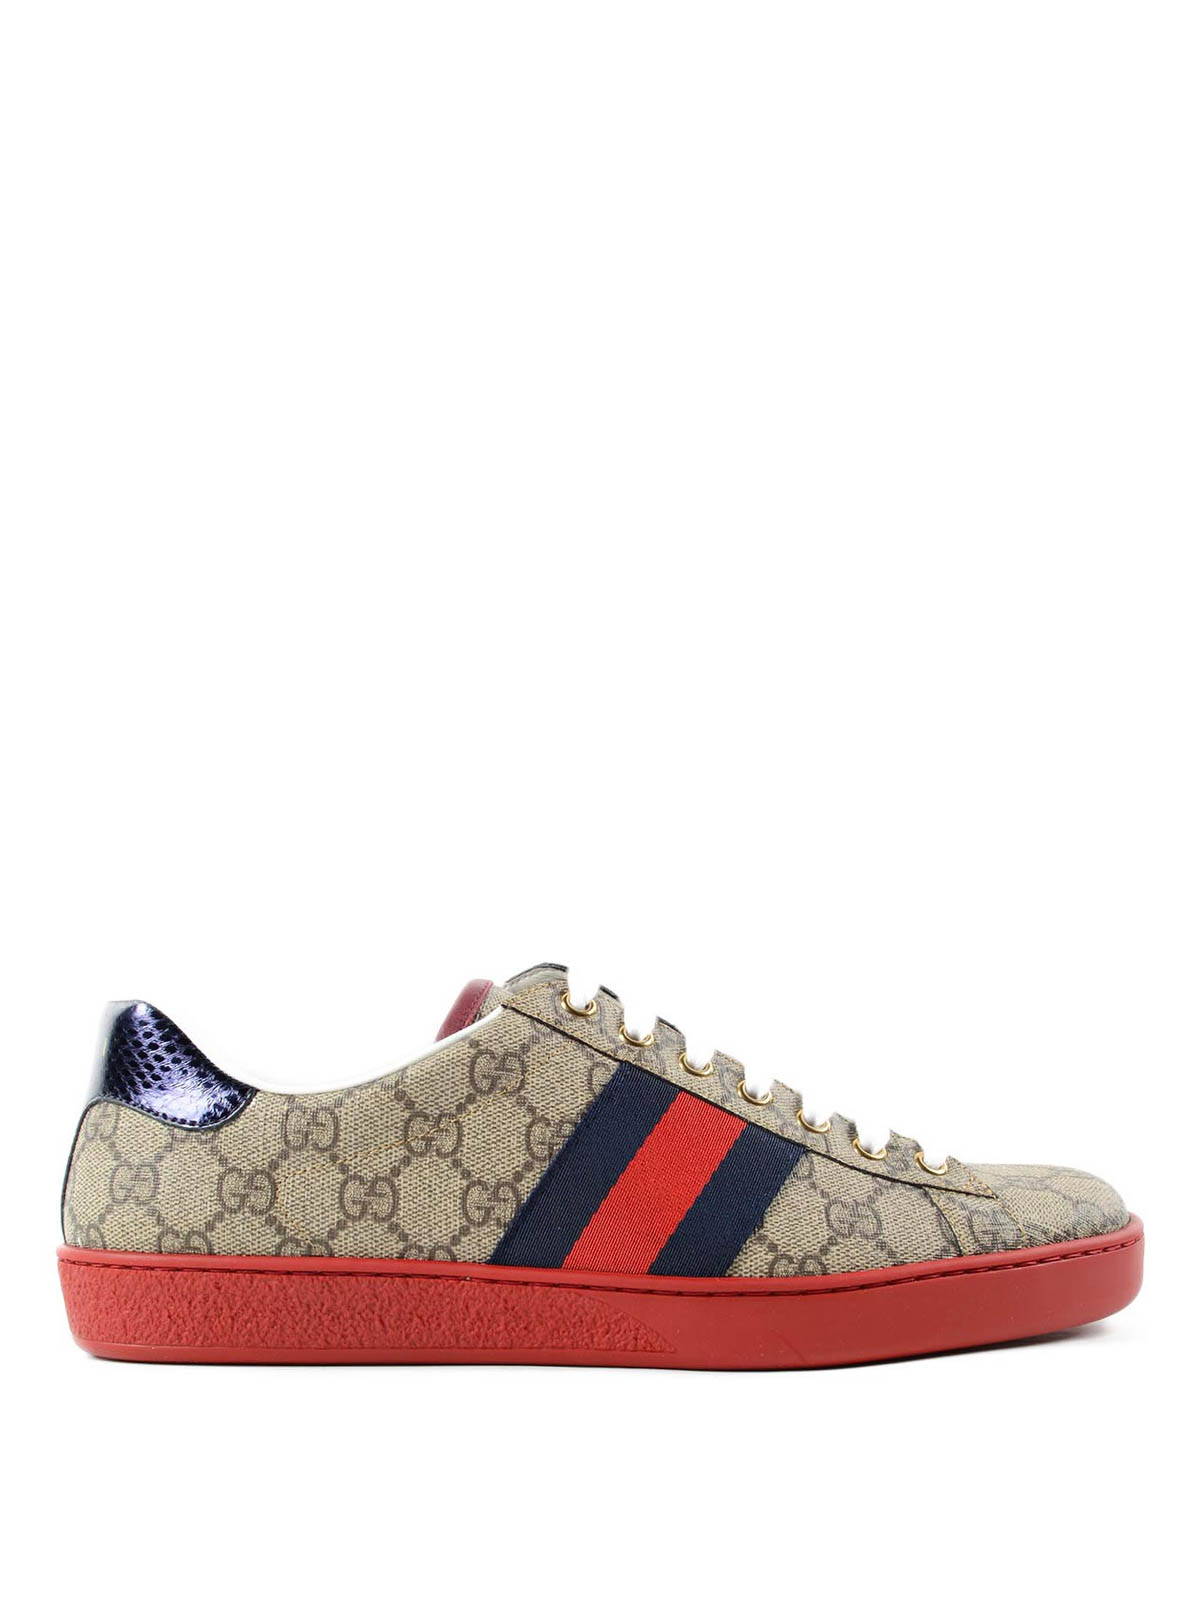 Gucci - GG Supreme sneakers - trainers - 429445/K2LH0 9767 | 0